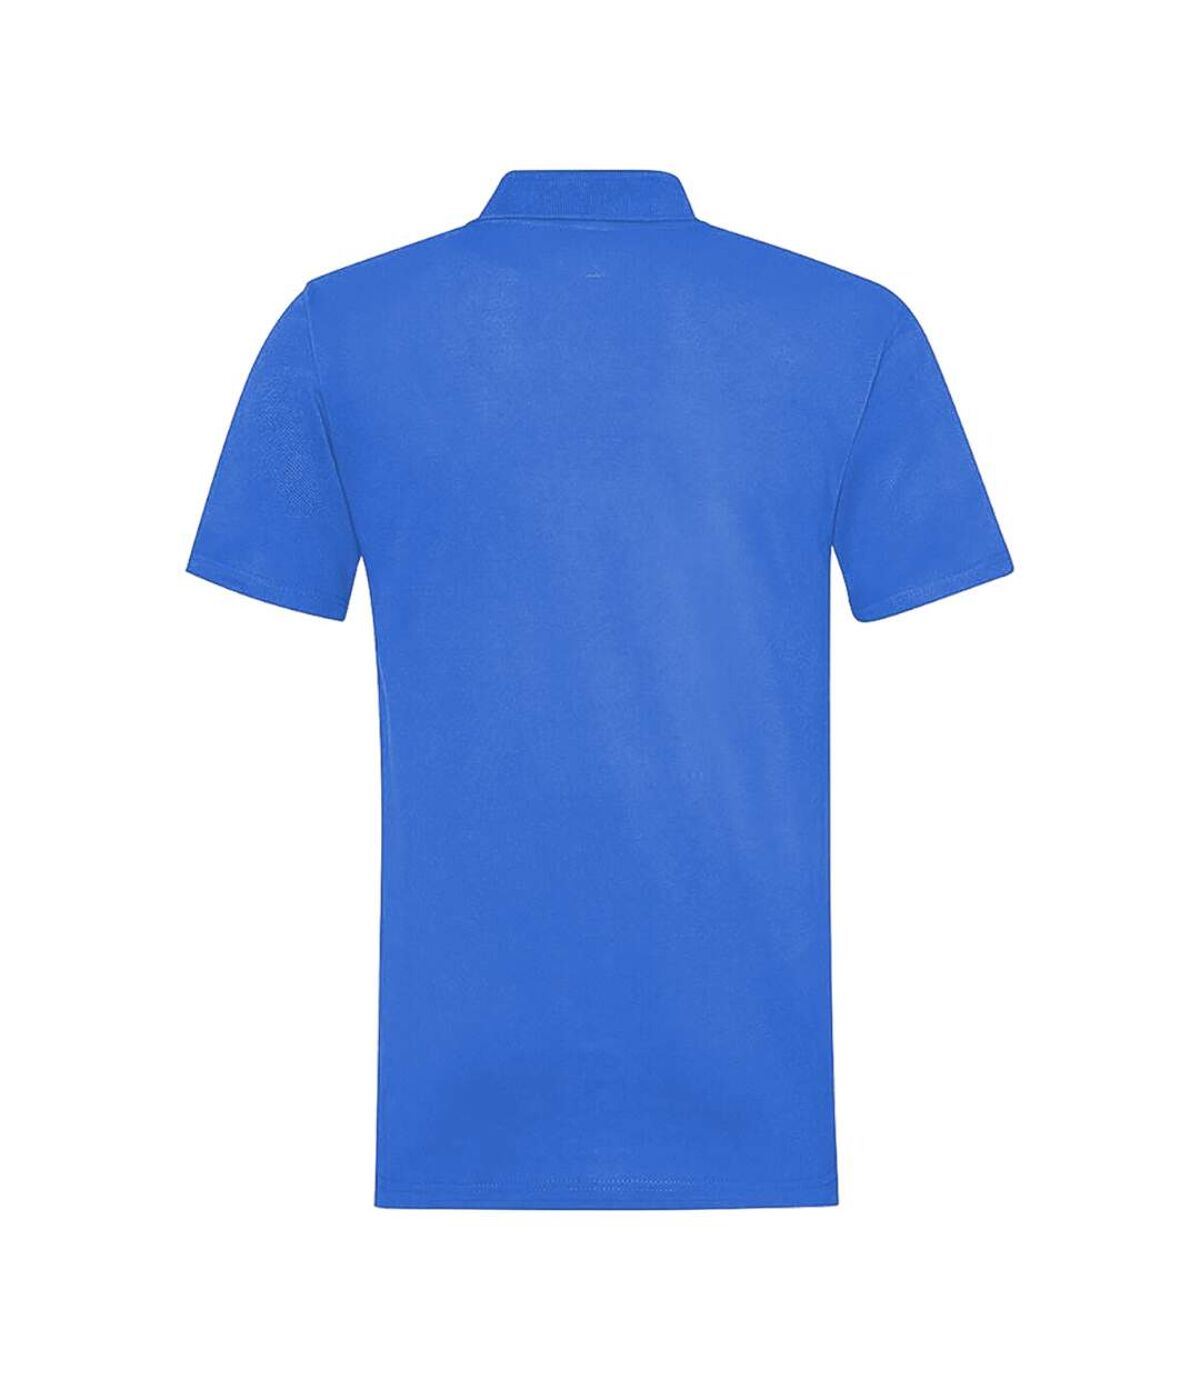 RTY Workwear Mens Pique Knit Heavyweight Polo Shirt (S-10XL) / Extra Large Sizes (Royal)